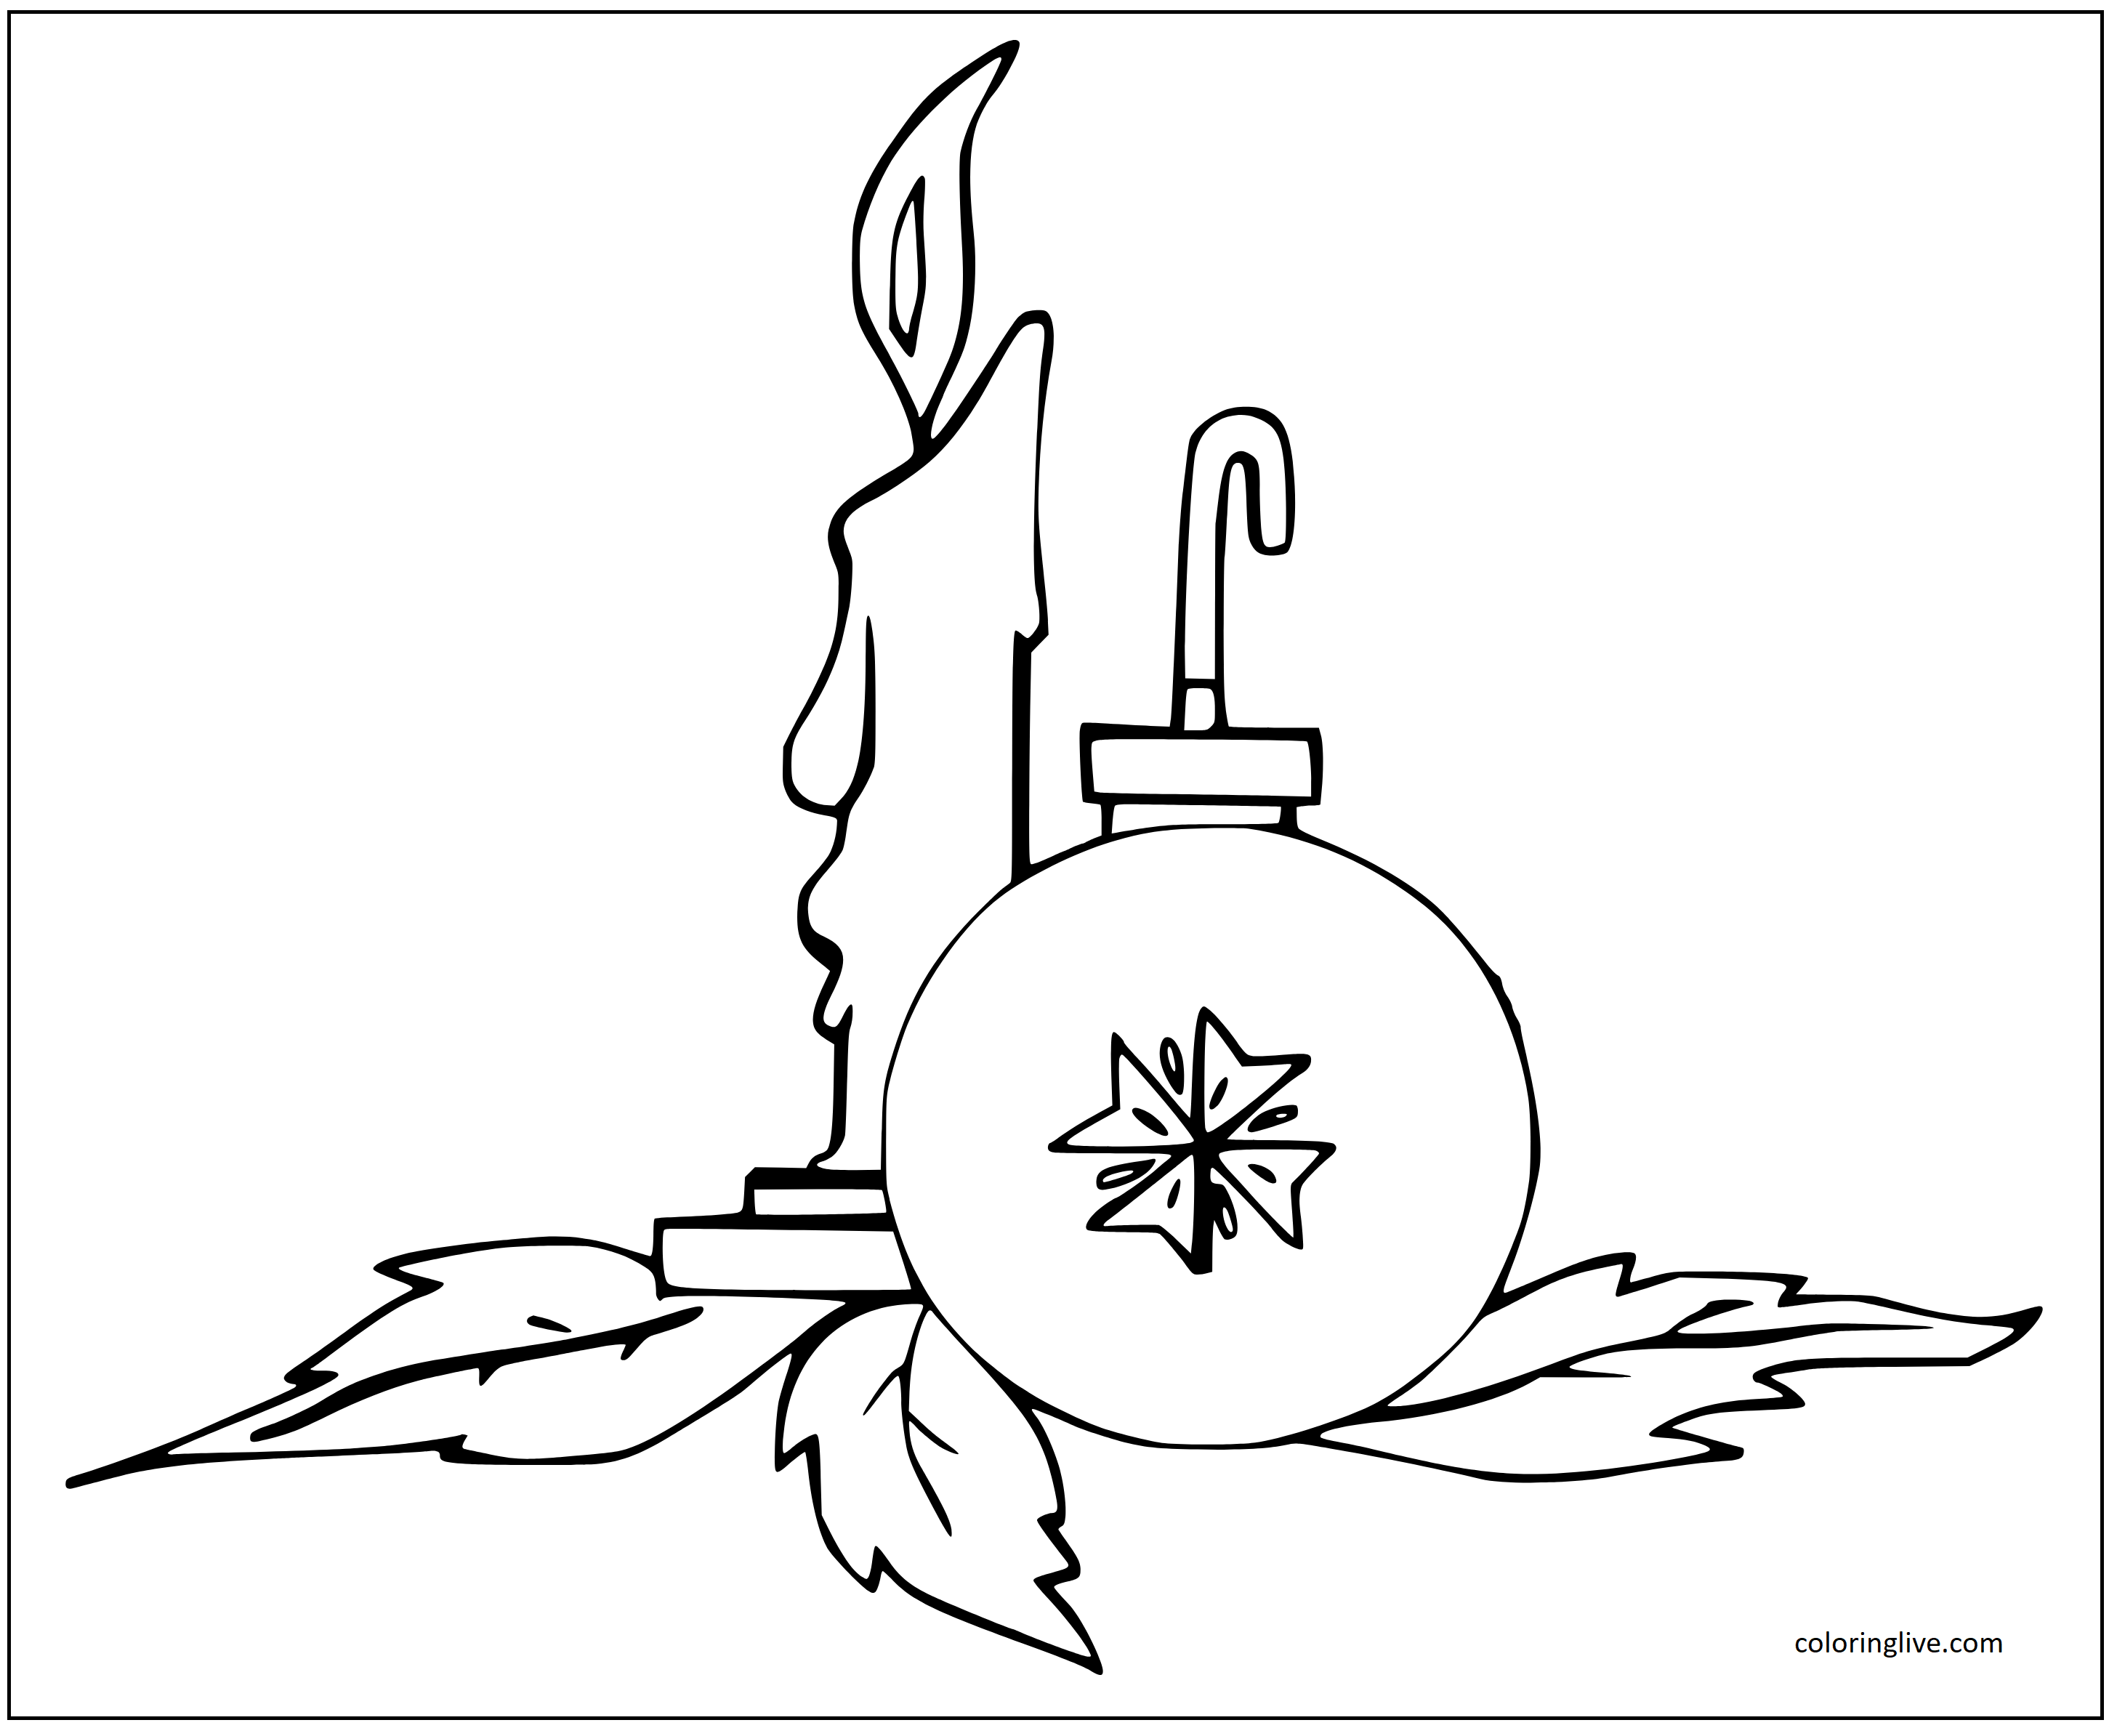 Printable Candy and Christmas Ornament  for Coloring Page for kids.